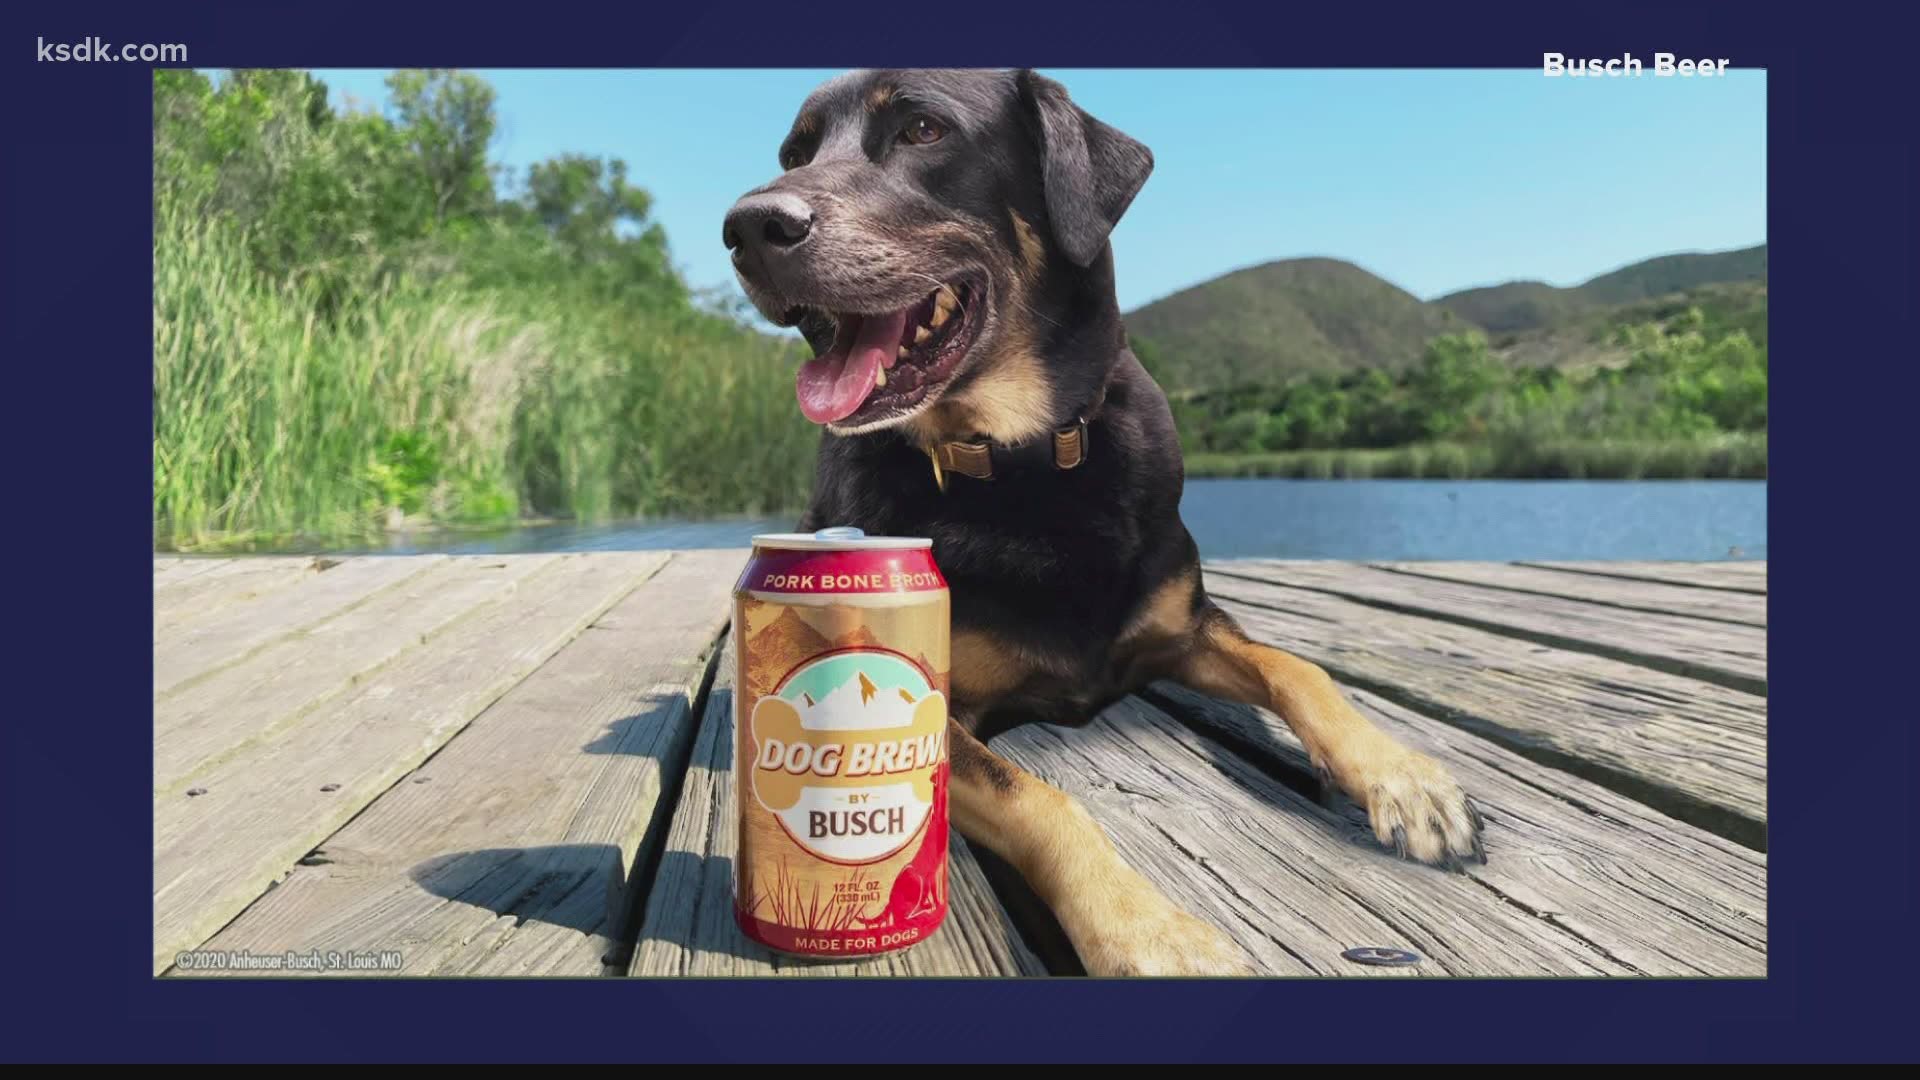 The “beer” is actually alcohol-free and is more like a bone broth treat for pets.